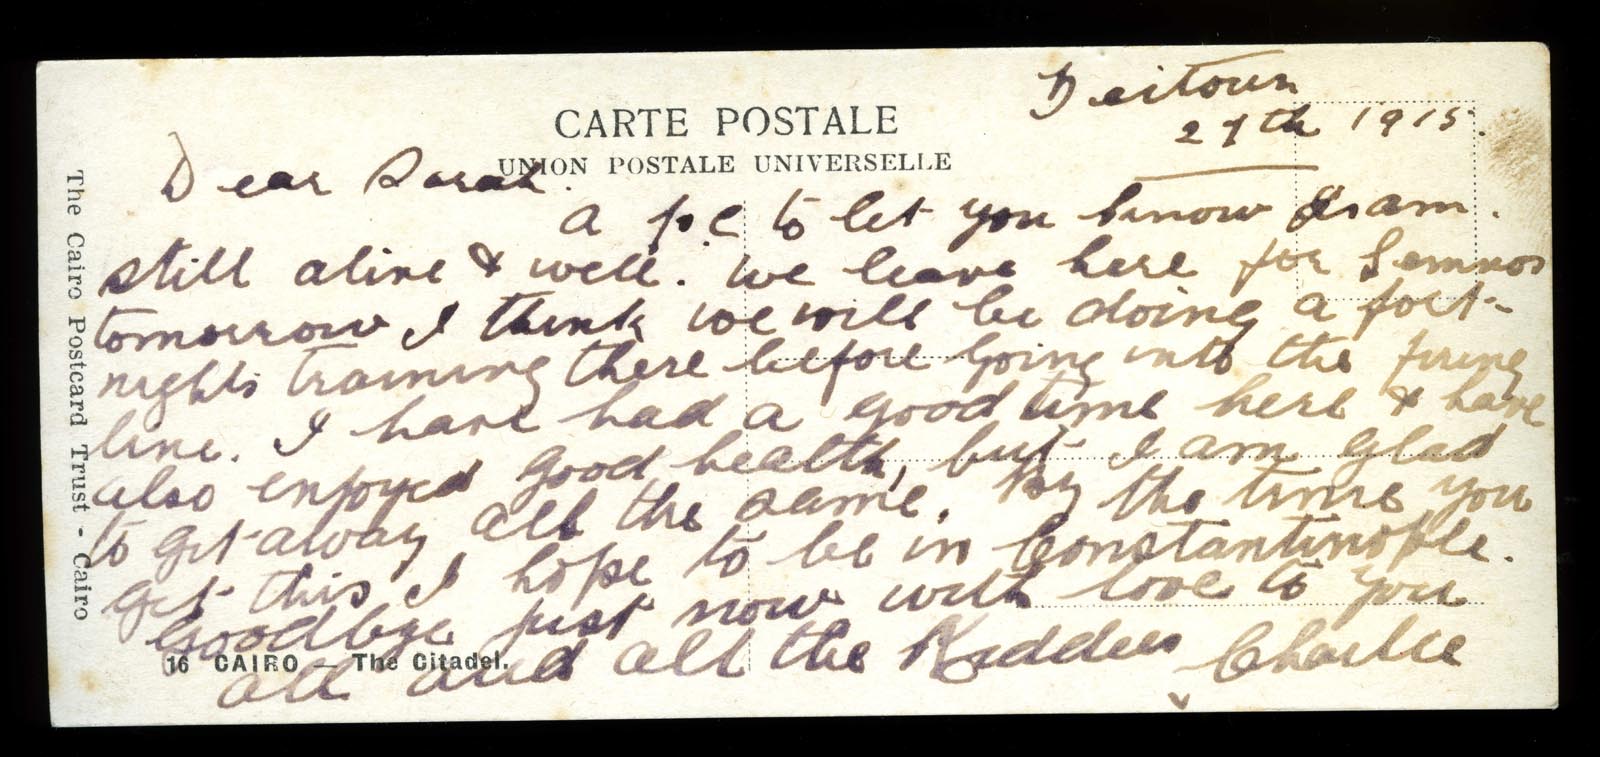 Souvenir postcard from Charles Smart, 1915 verso, rotated)